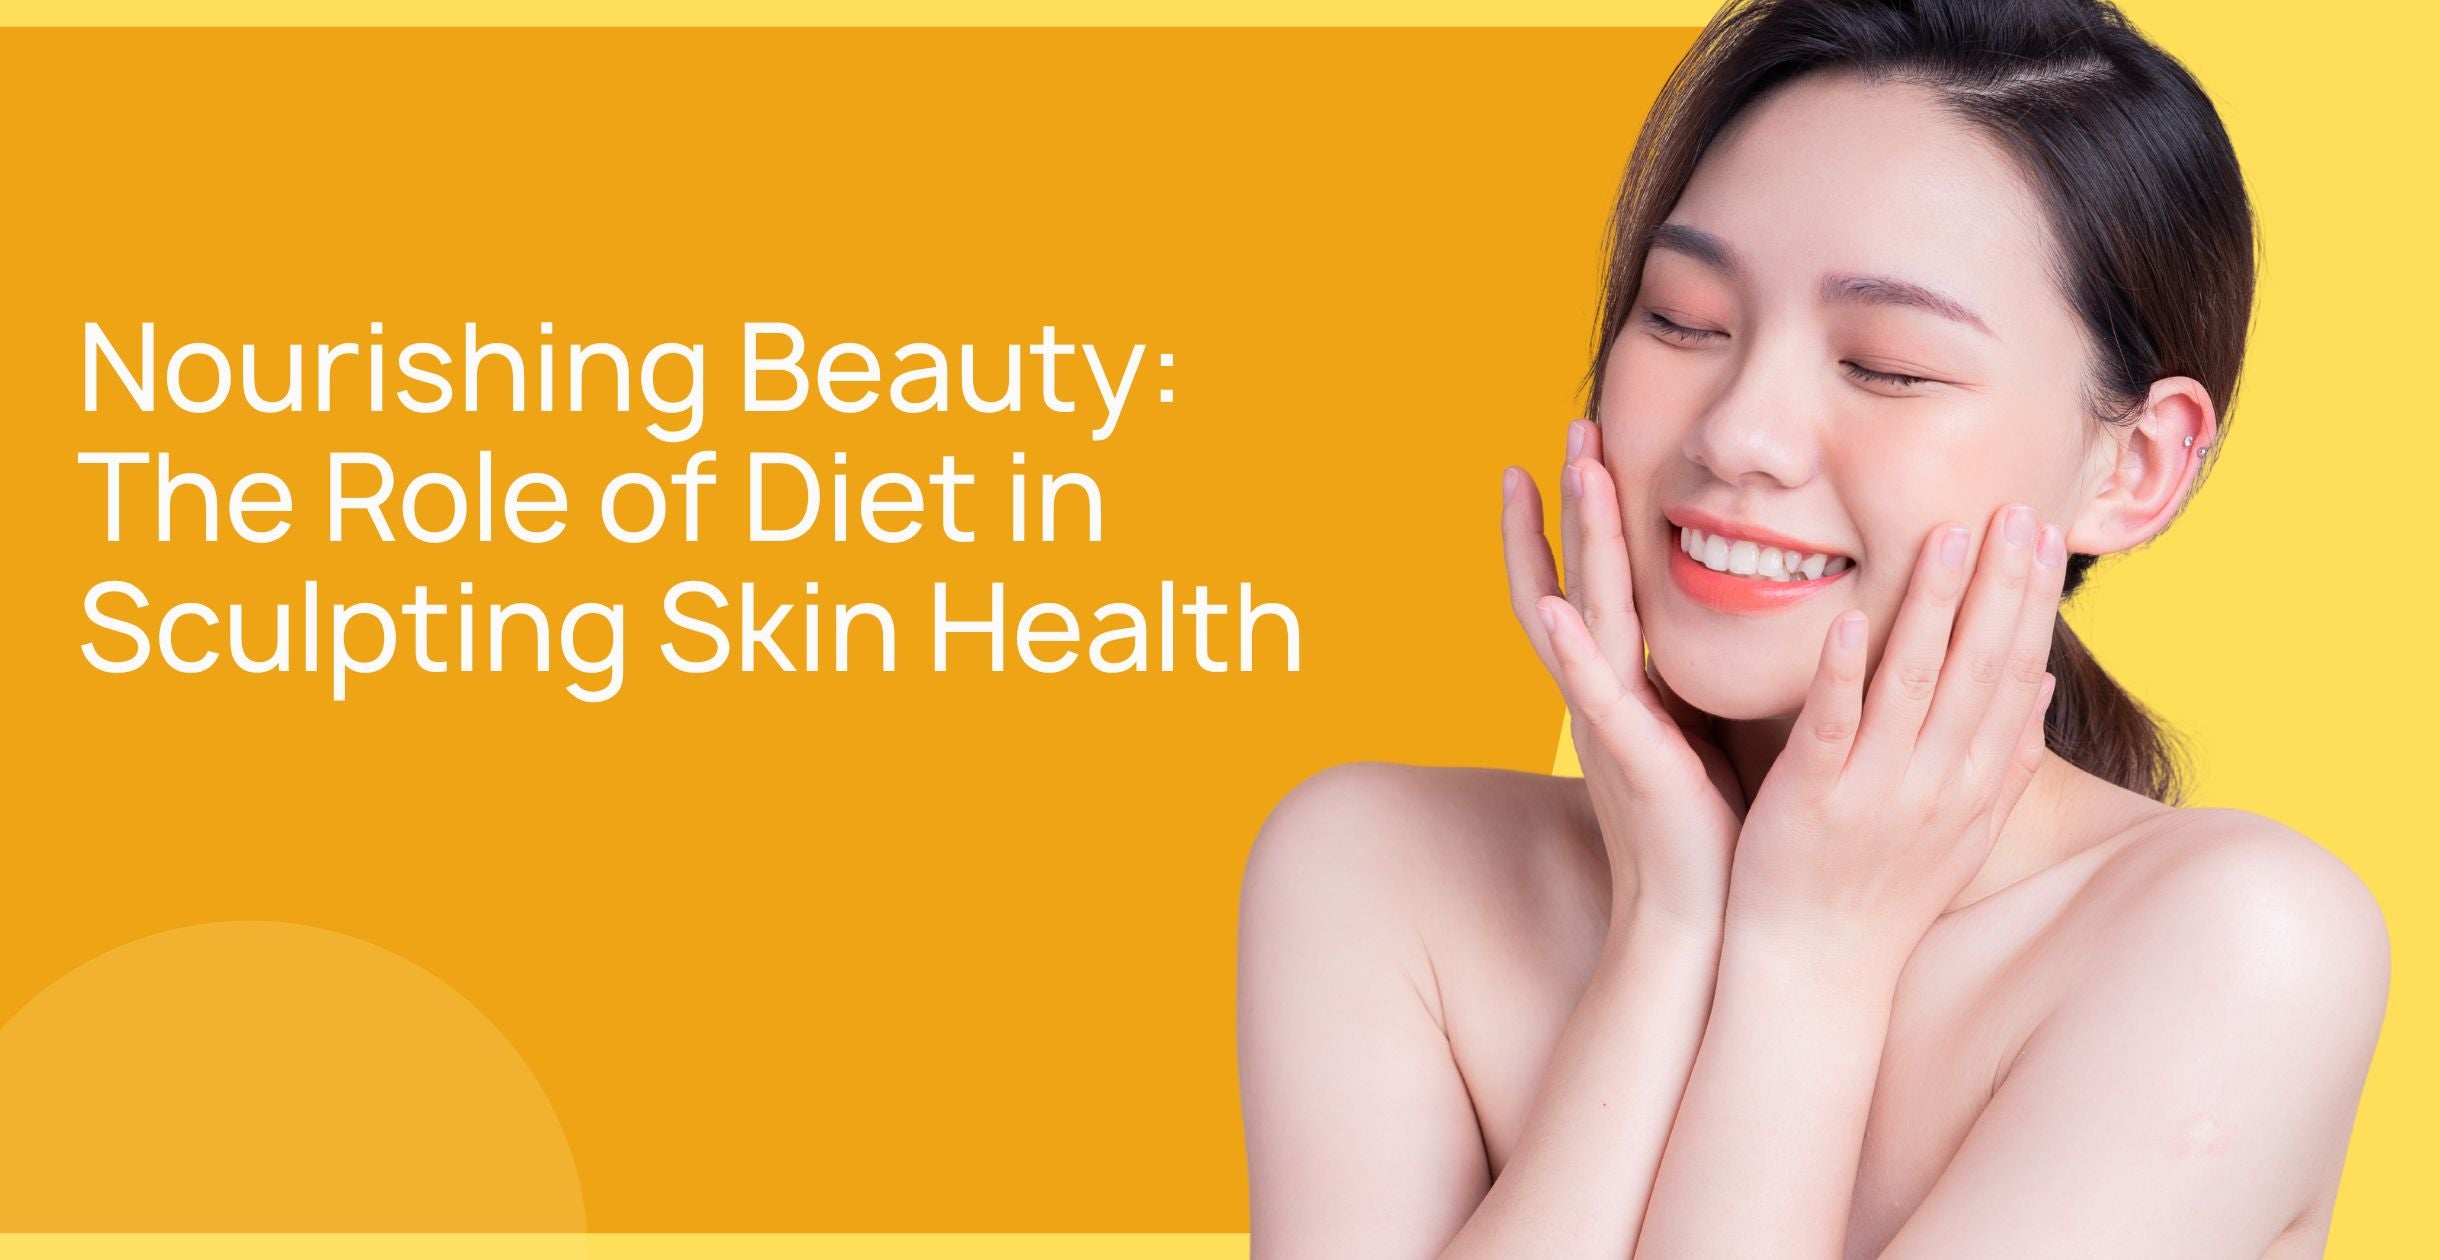 Nourishing Beauty: The Role of Diet in Sculpting Skin Health